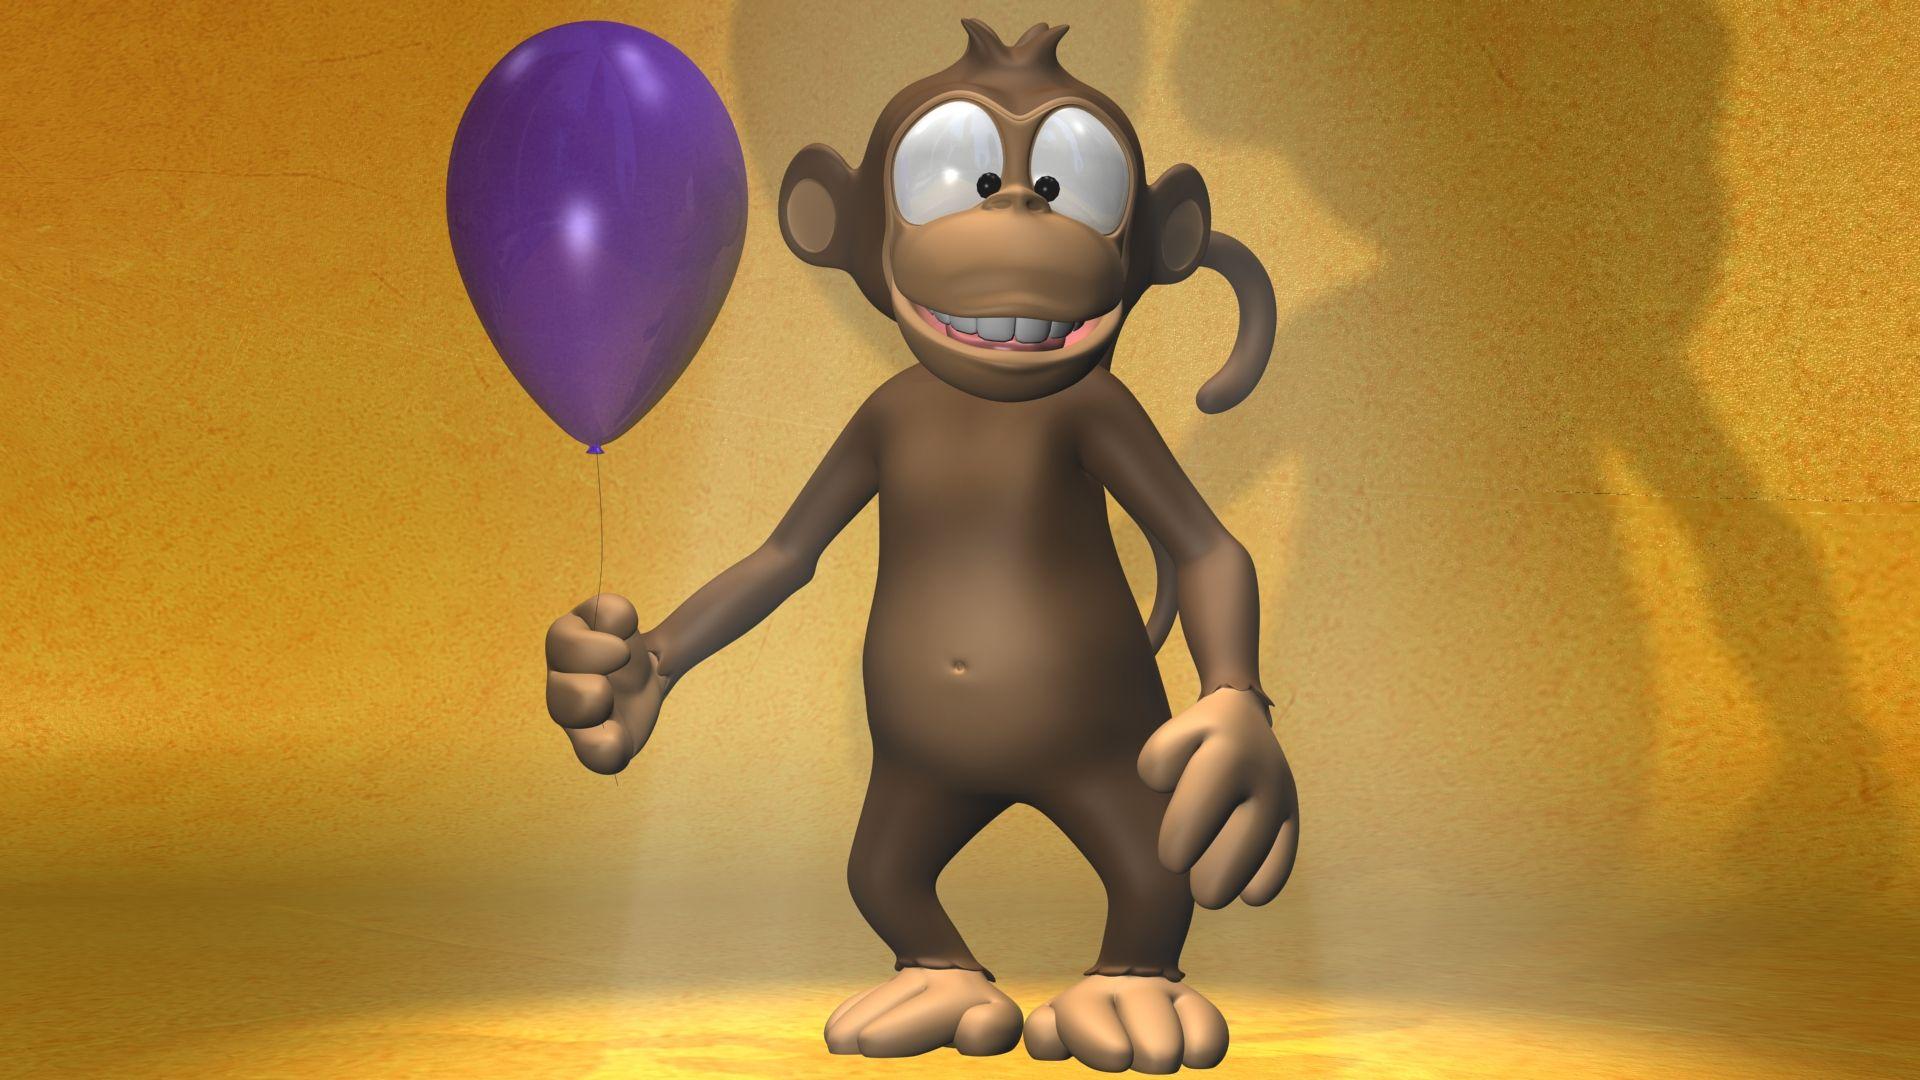 1920x1080 Cartoon Monkey 3D Full HD Wallpaper and Background Image.  1920x1080